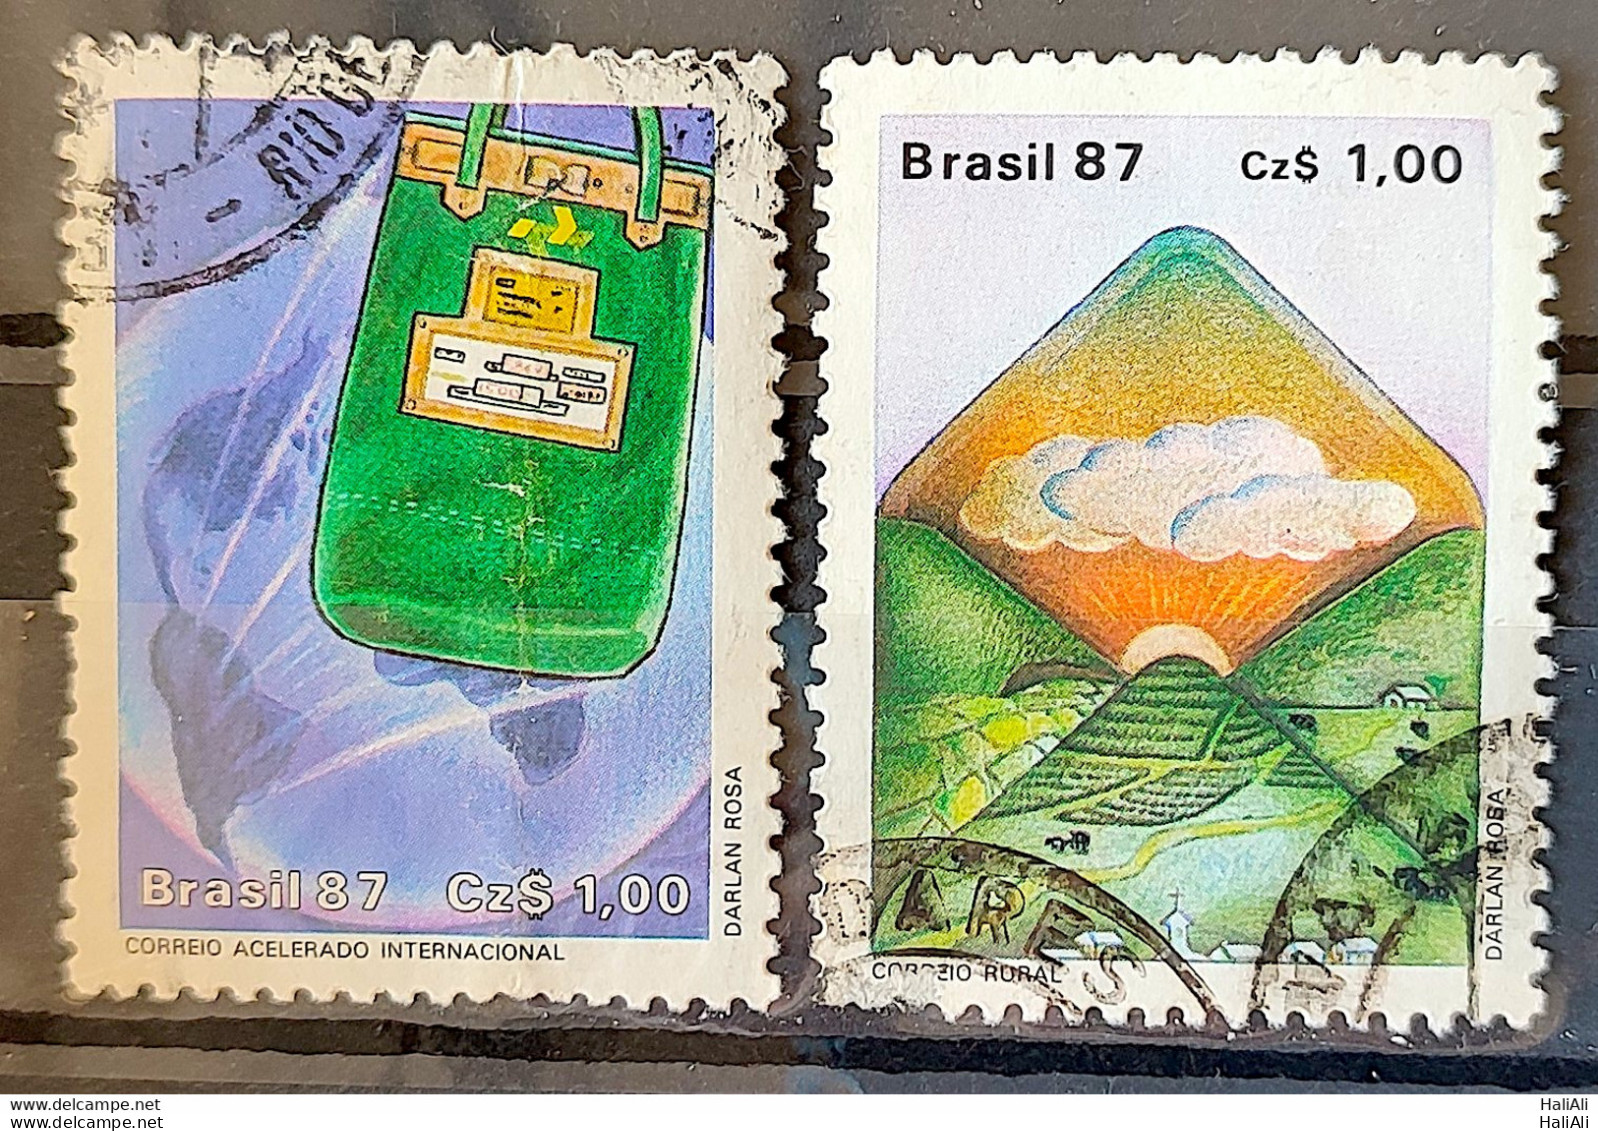 C 1545 Brazil Stamp Postal Service Malote Letter 1987 Complete Series Circulated 5 - Used Stamps